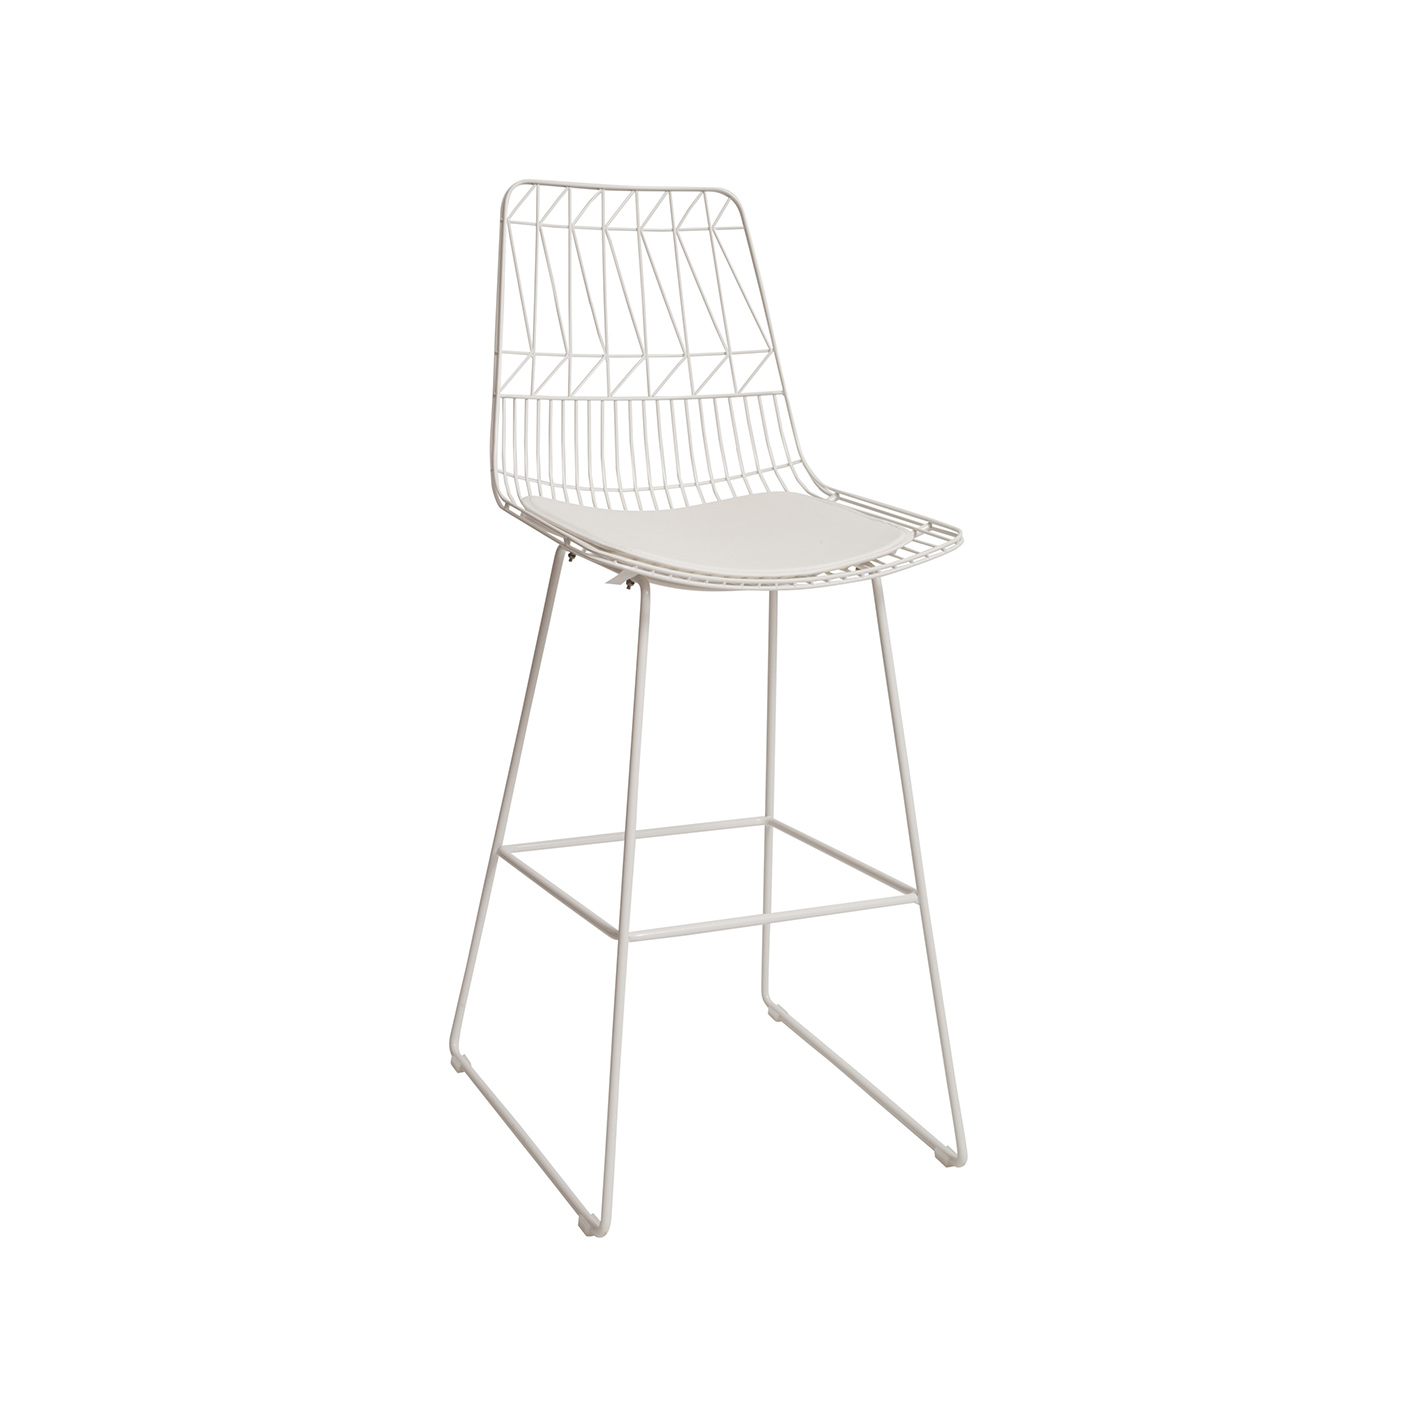 bend lucy bar stool